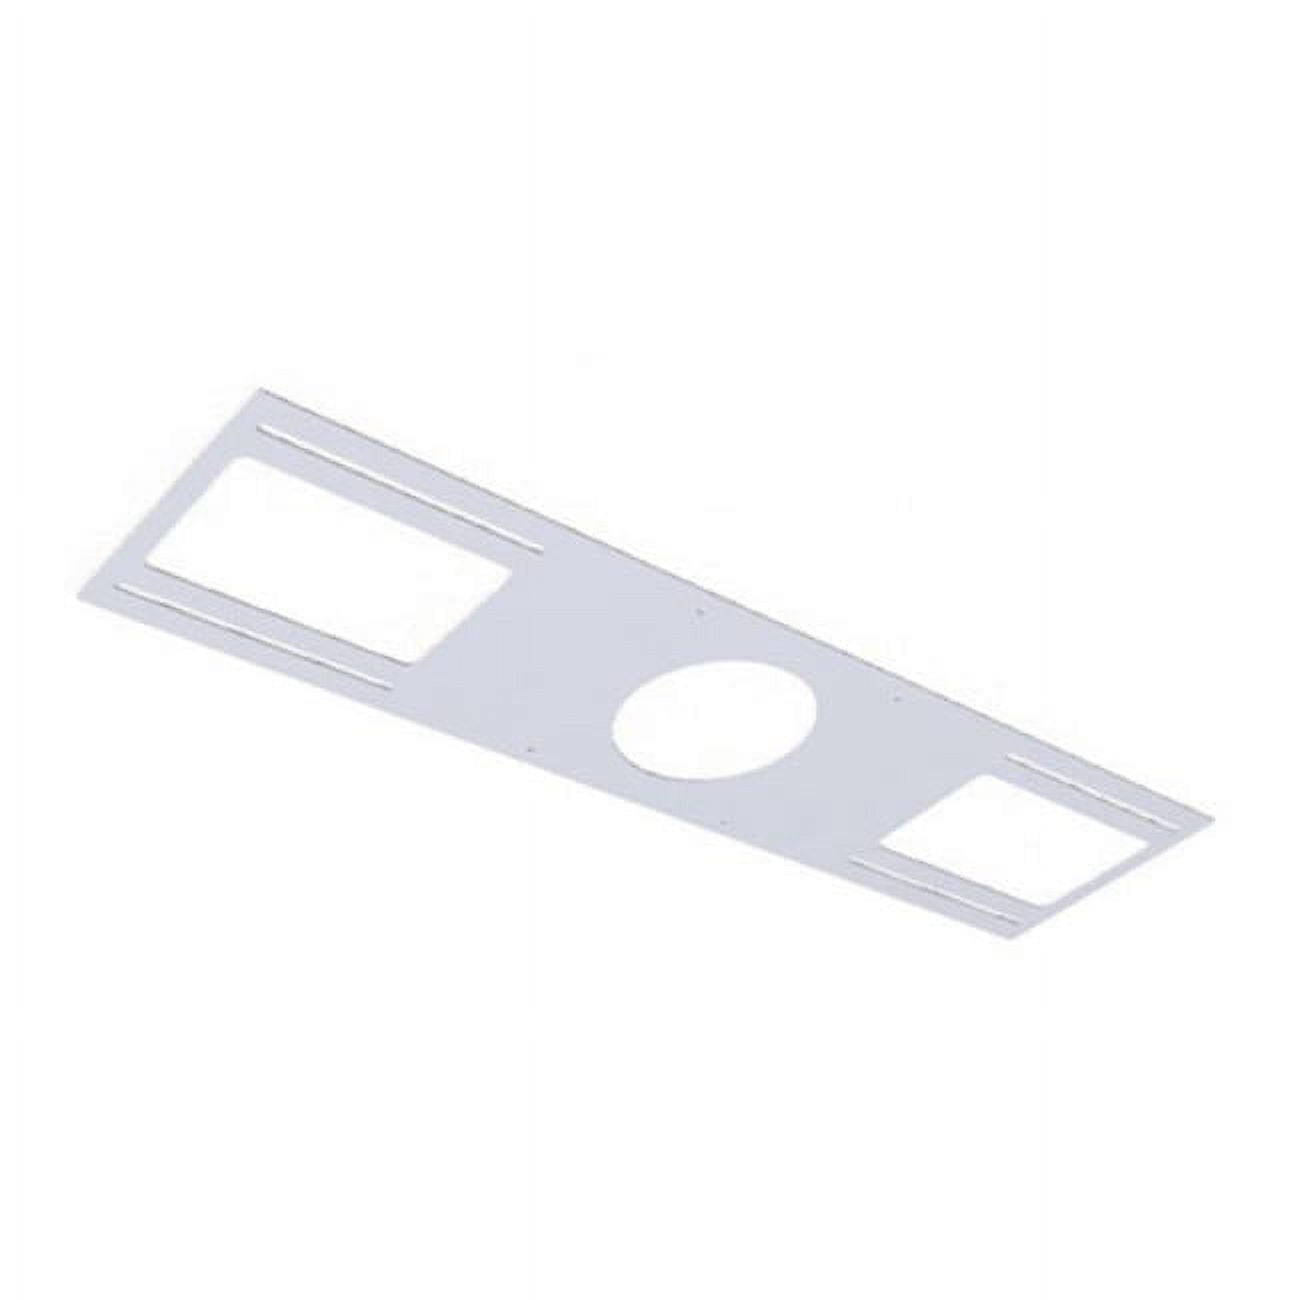 Rp-em8 8 In. Round Rough-in Plate For Em8